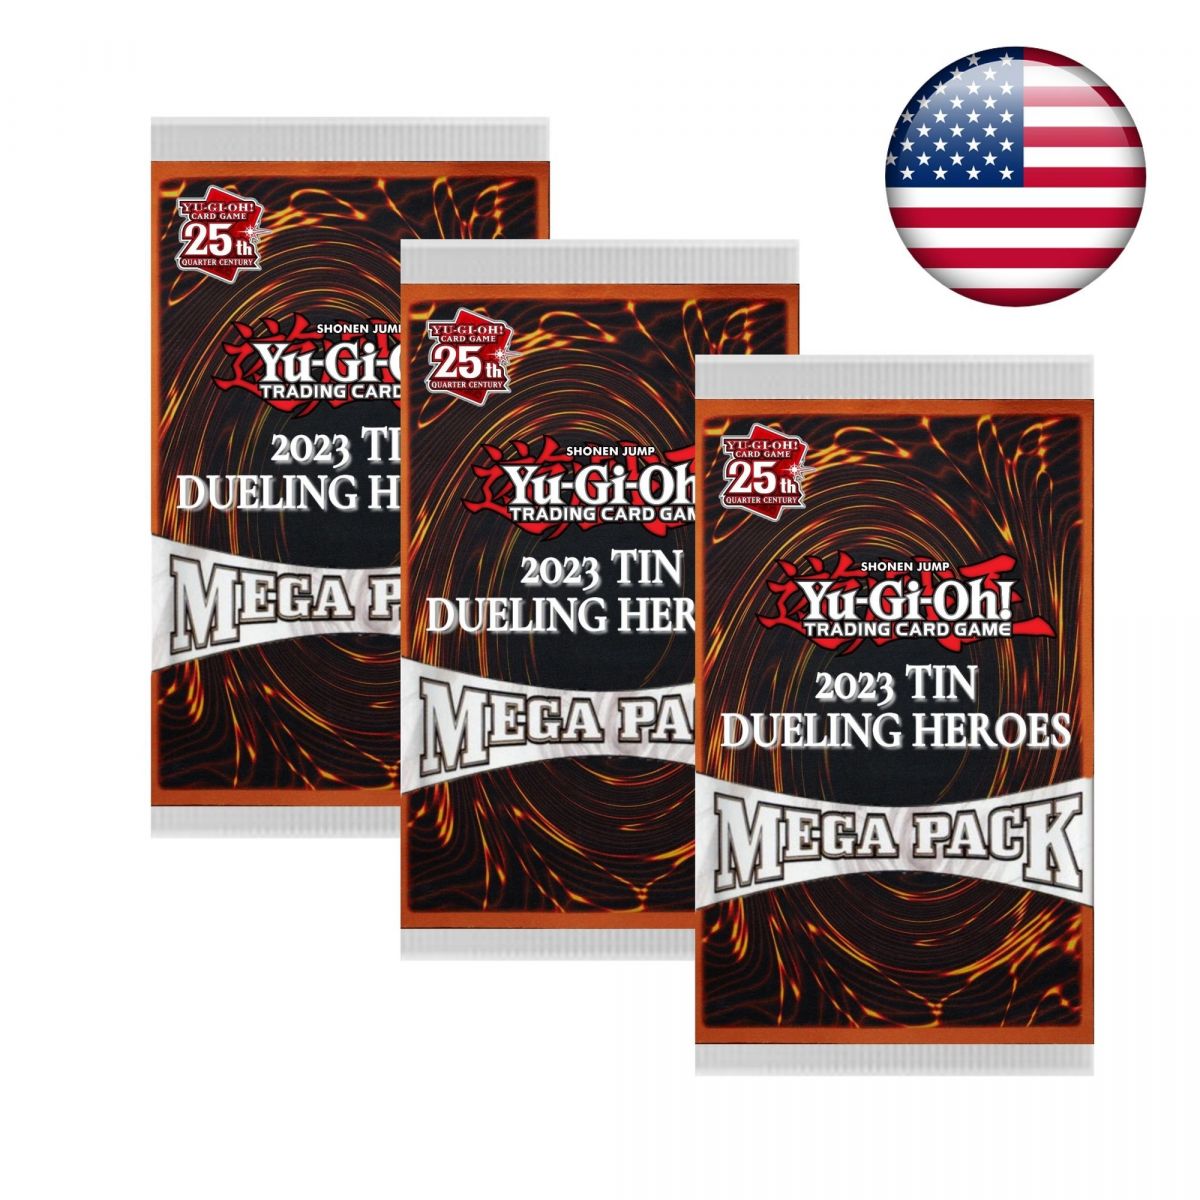 Item Yu Gi Oh! - Lot of 3 Mega Pack Tin Box Boosters 25th Anniversary 2023 - Dueling Heroes - US